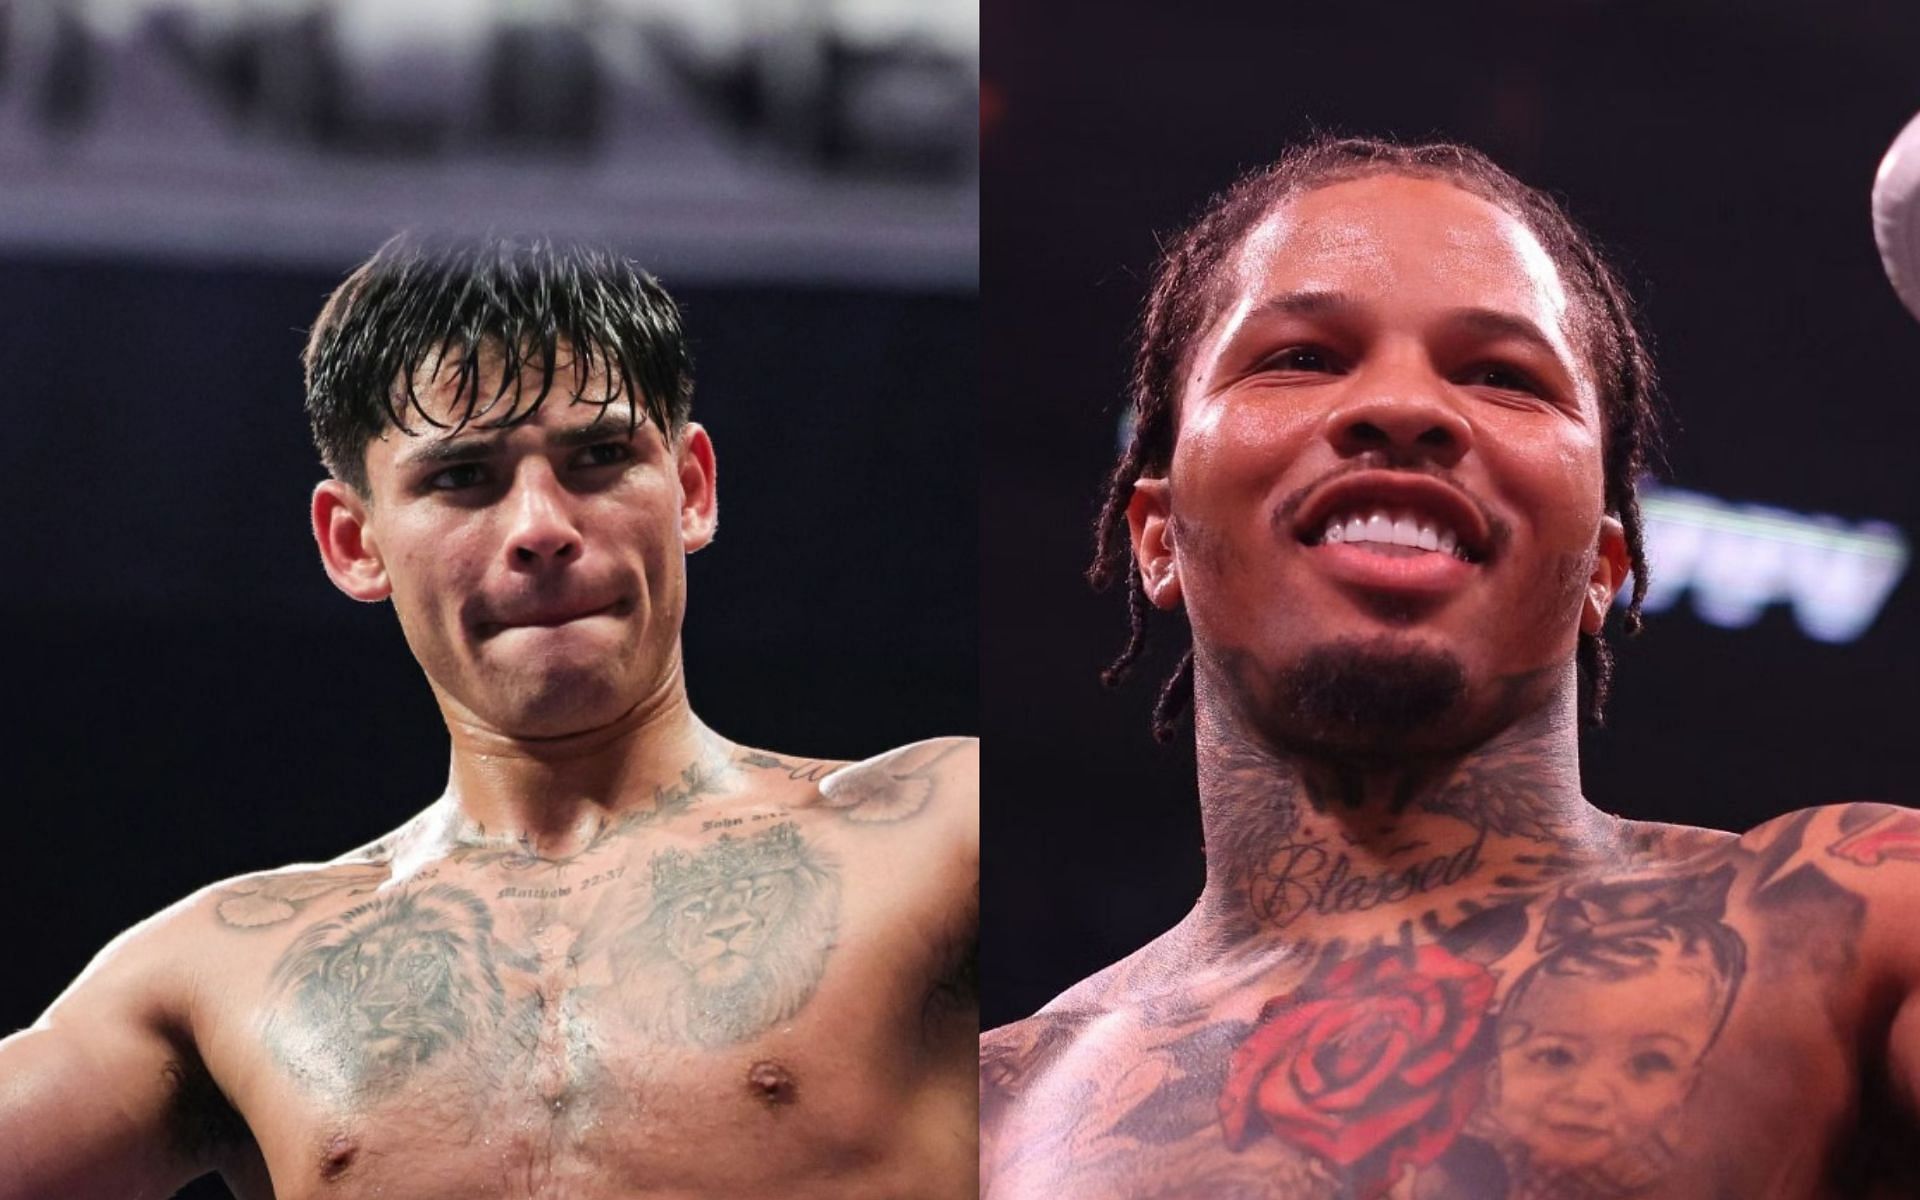 (Left) Ryan Garcia and Gervonta Davis (Right) (Image credits: Getty Images)